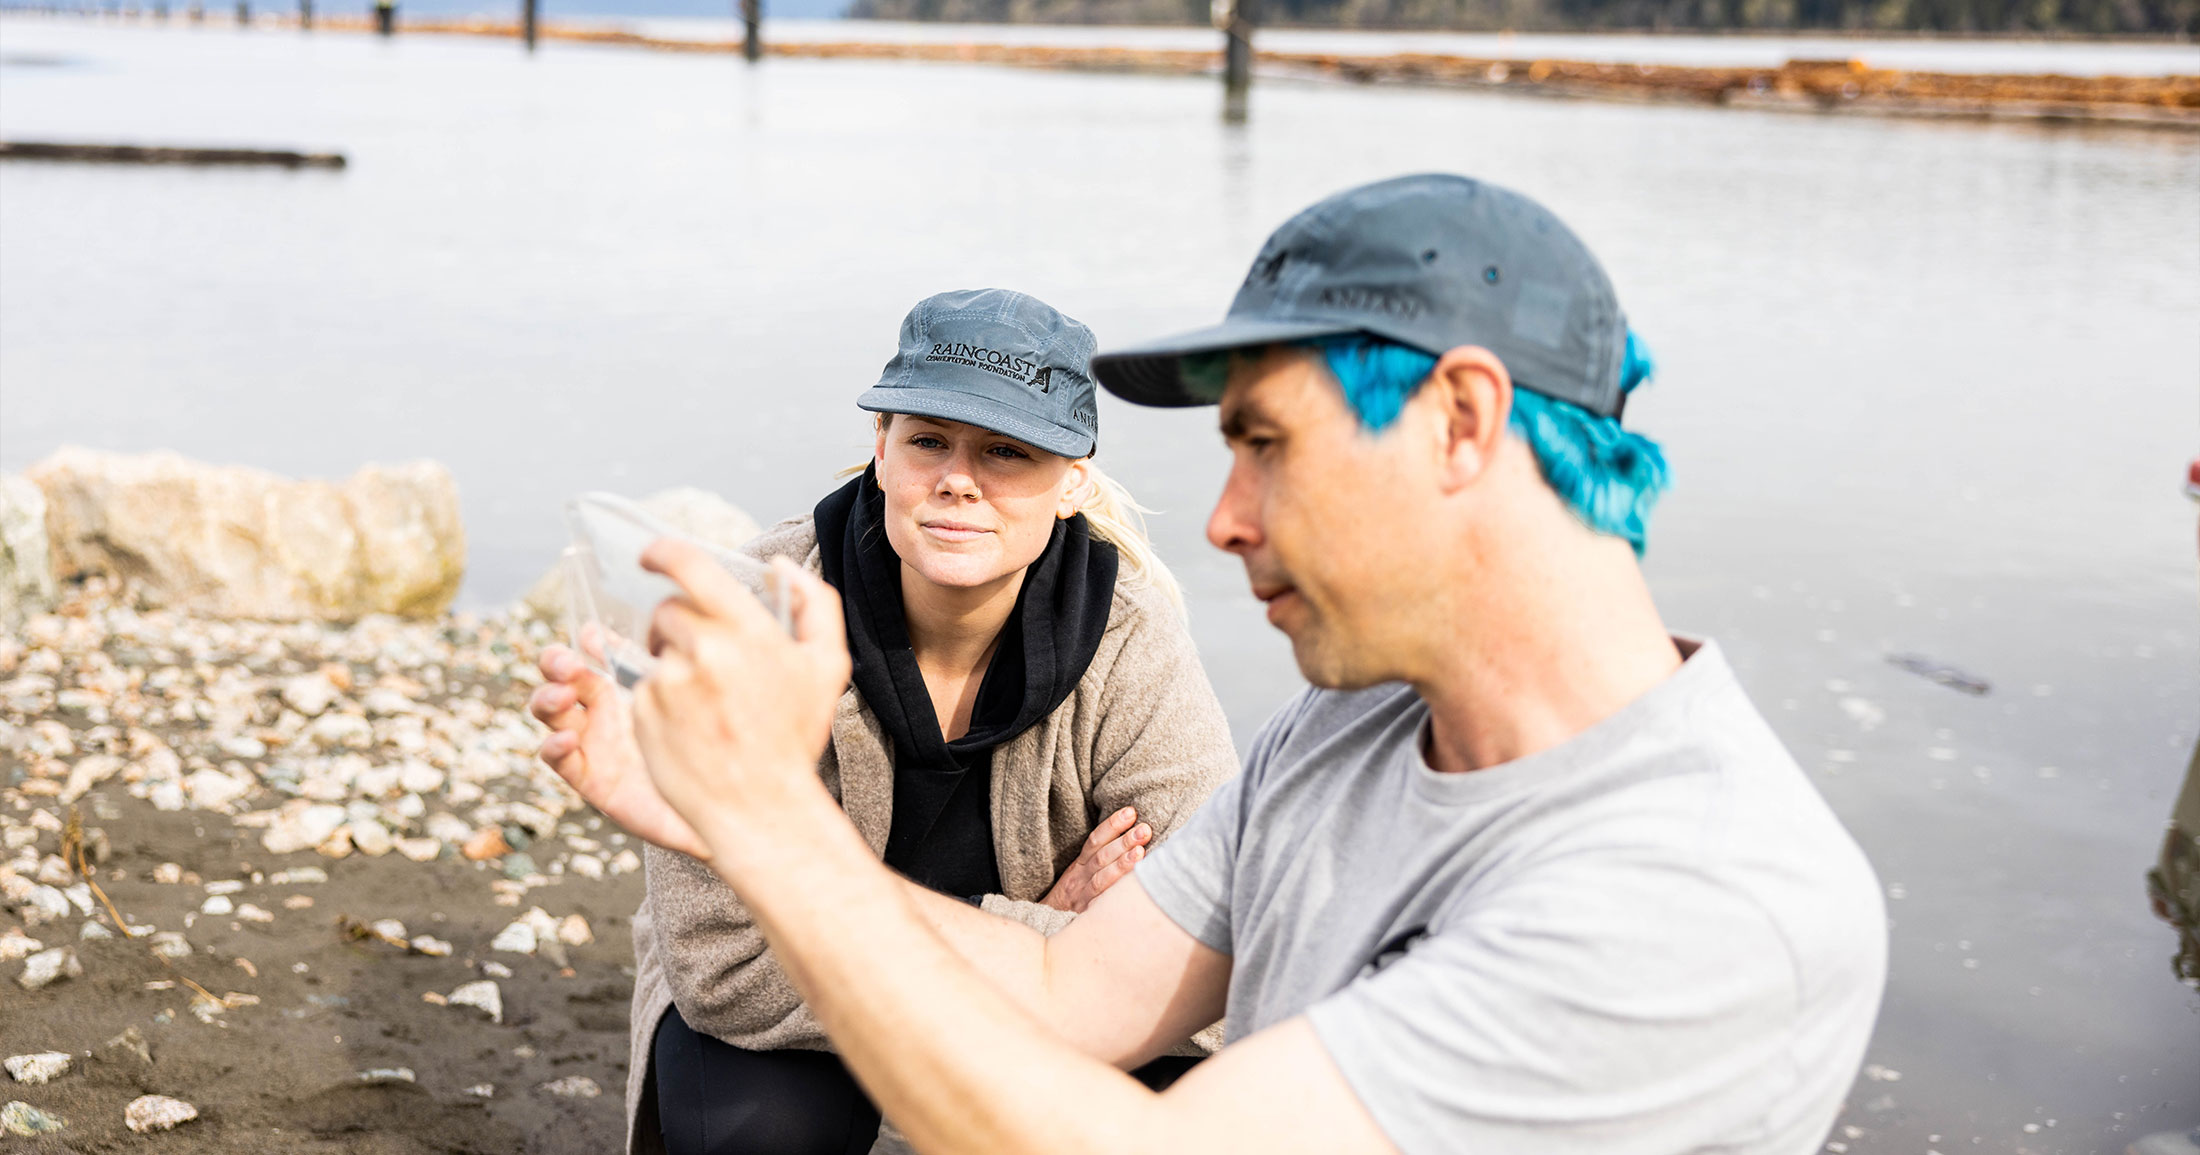 Dave Scott and Chelsea Greer looking at a salmon viewfinder while wearing Raincoast hats.